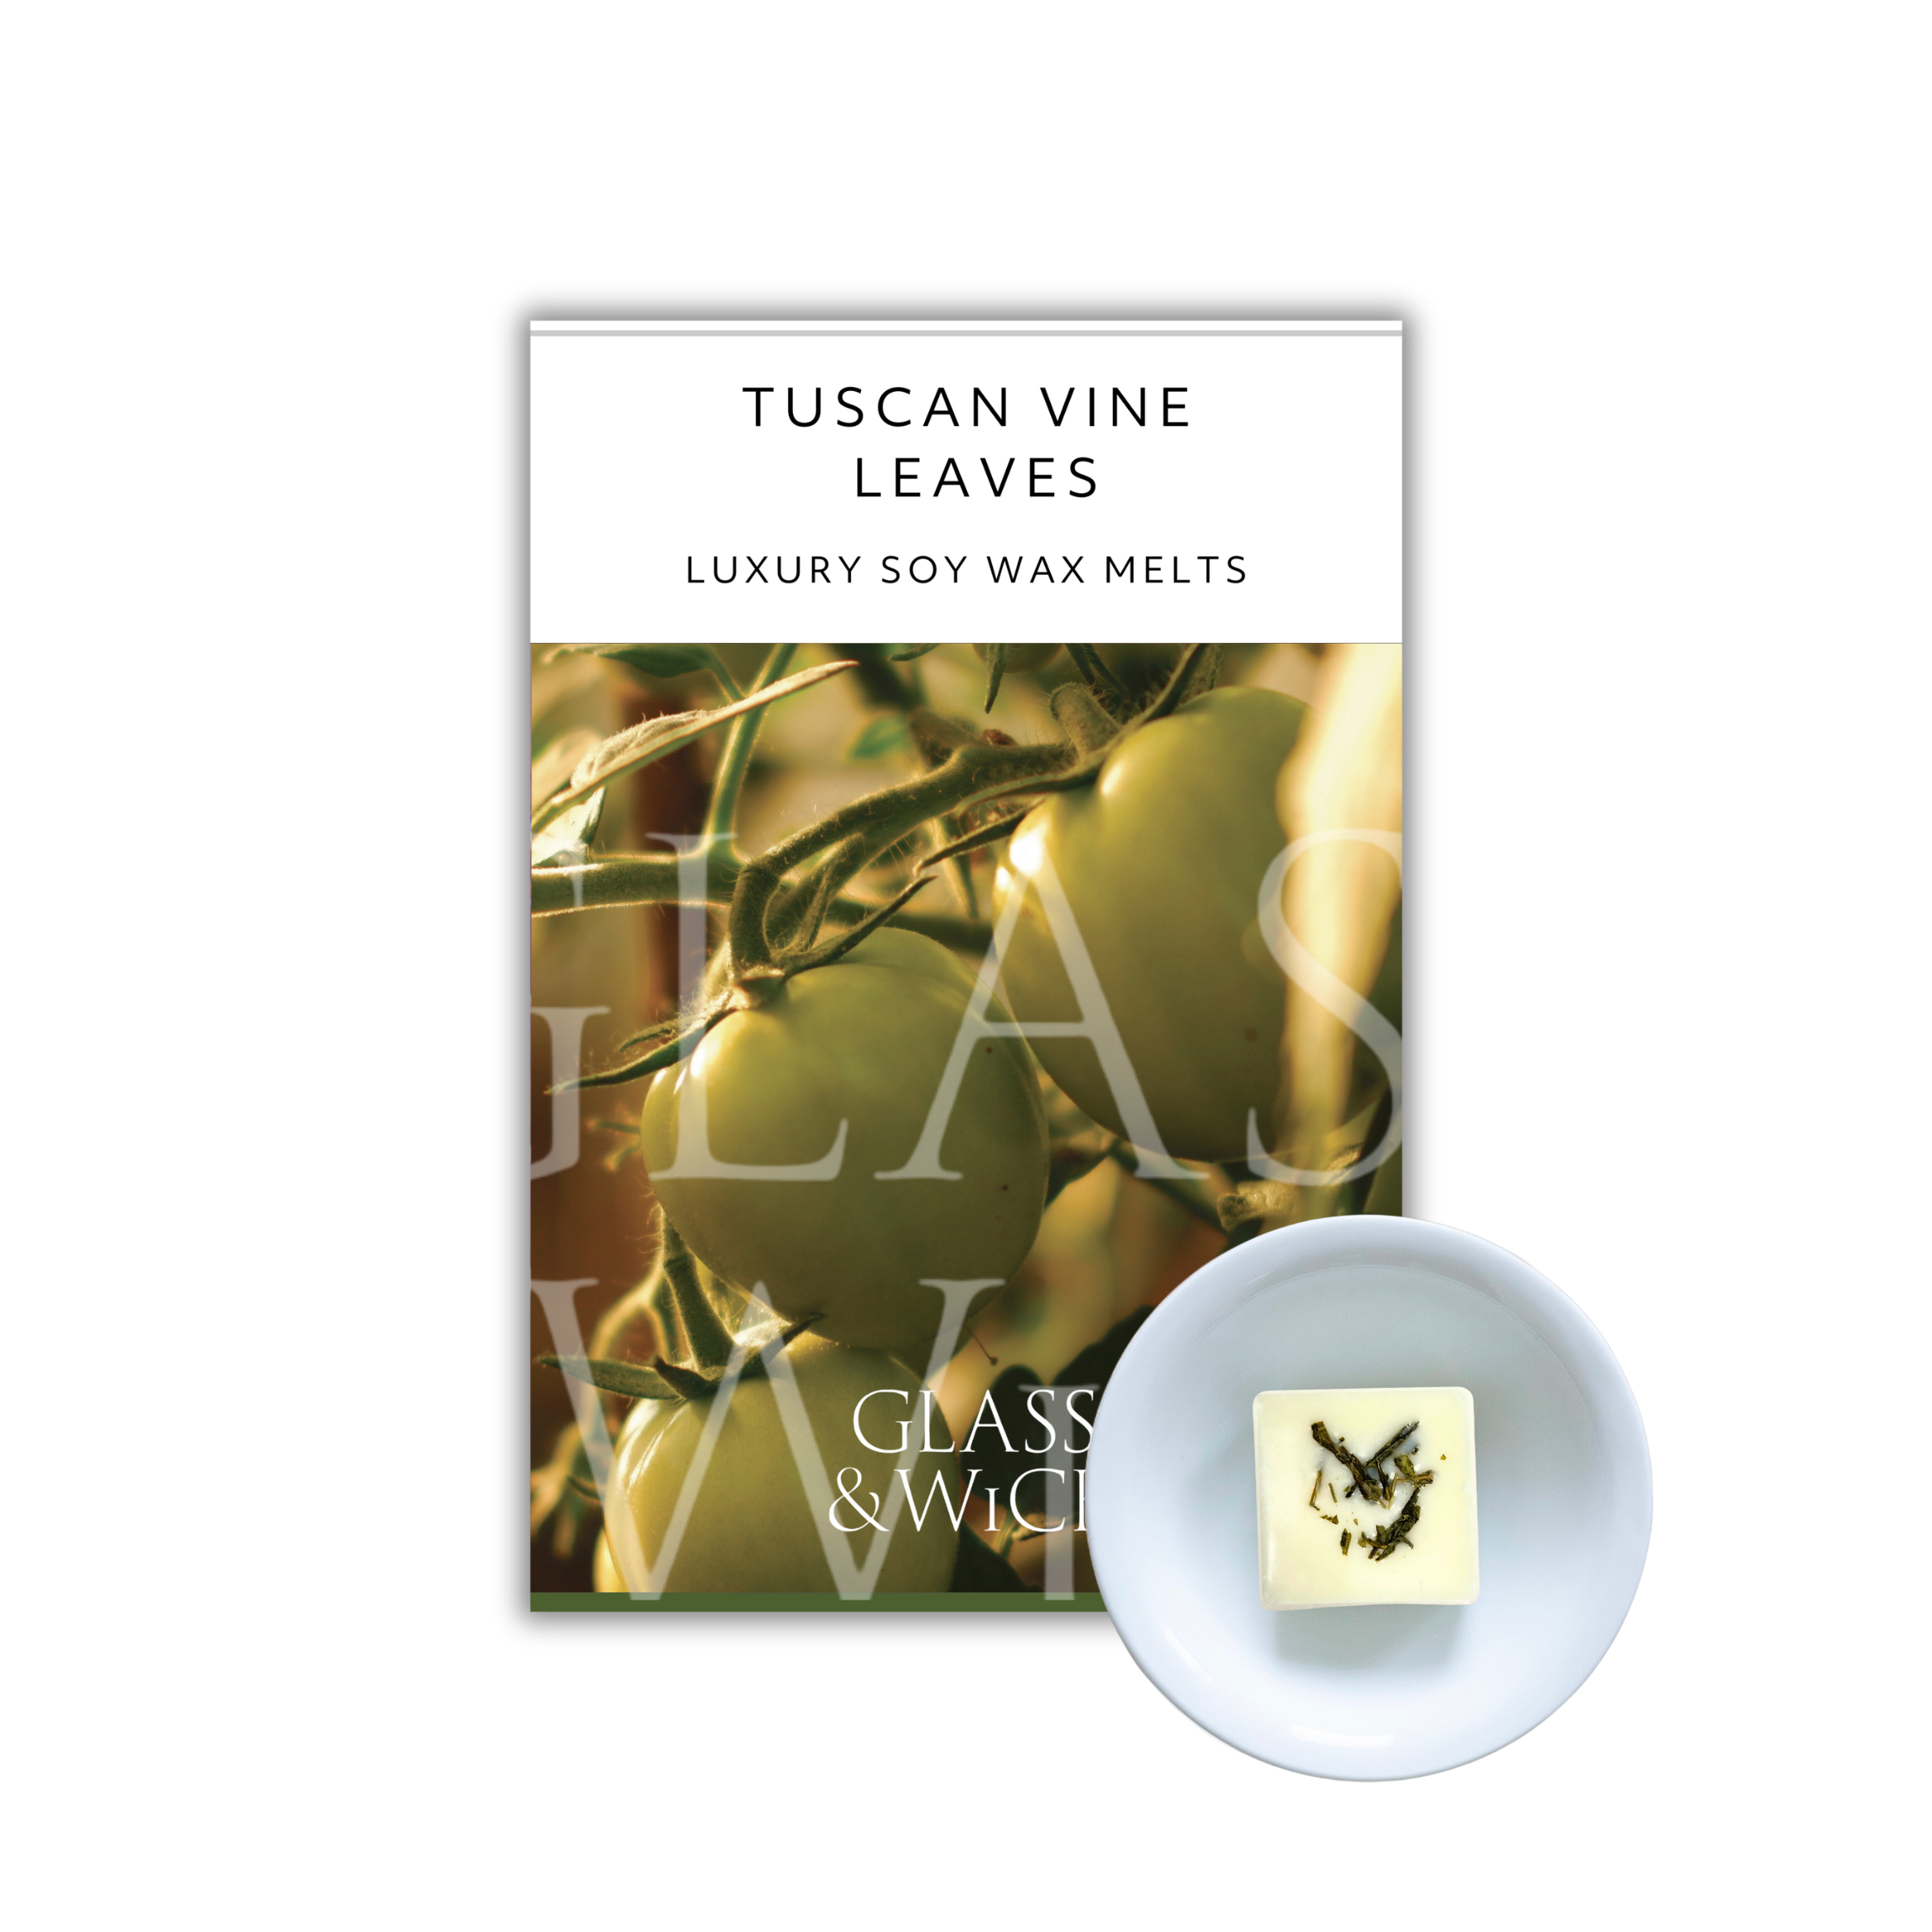 Tuscan Vine Leaves Soy Wax Melts